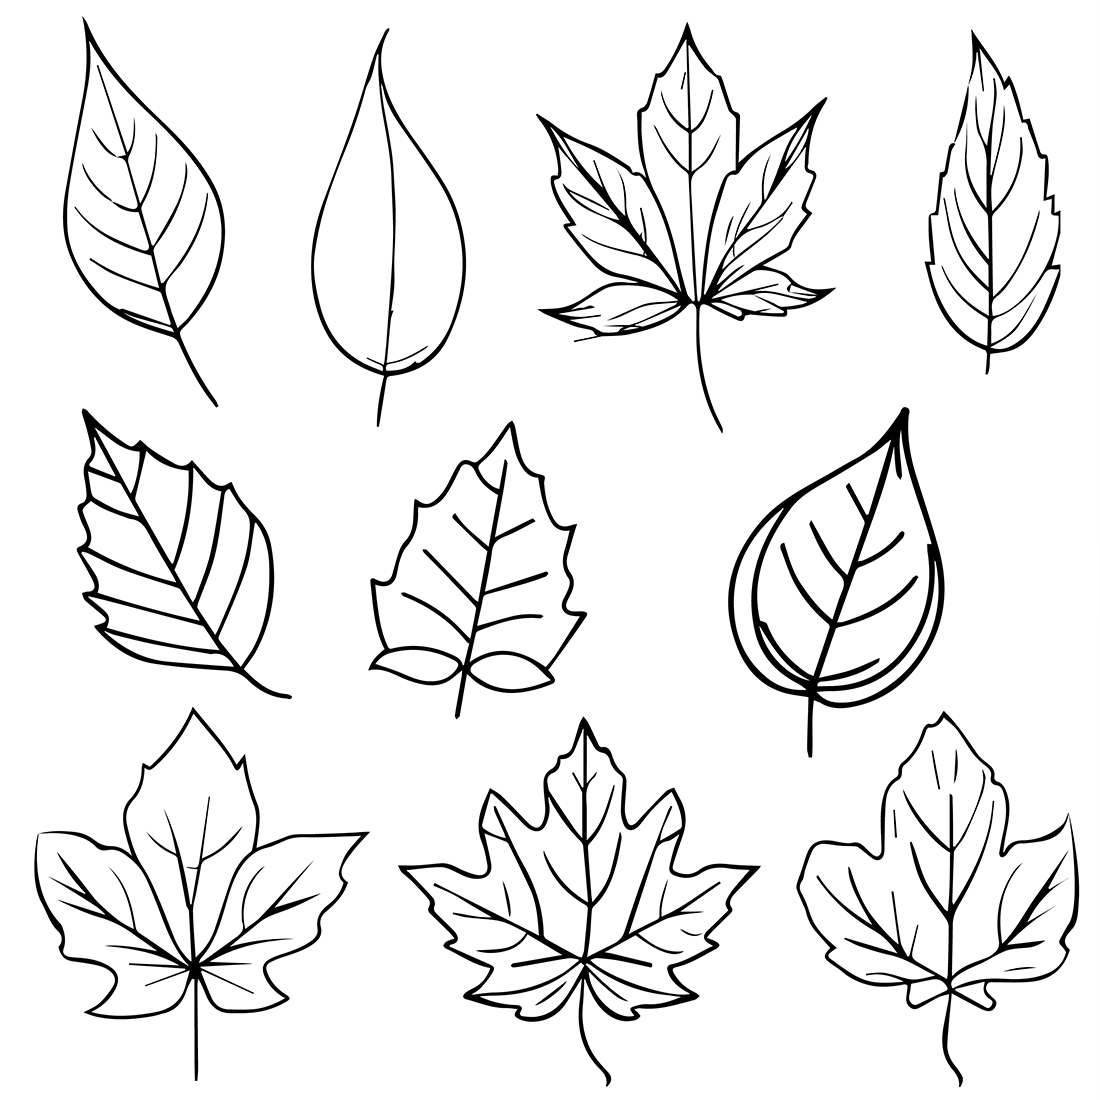 27 Autumn Leaves Outline Illustrations - Graphics | Motion Array